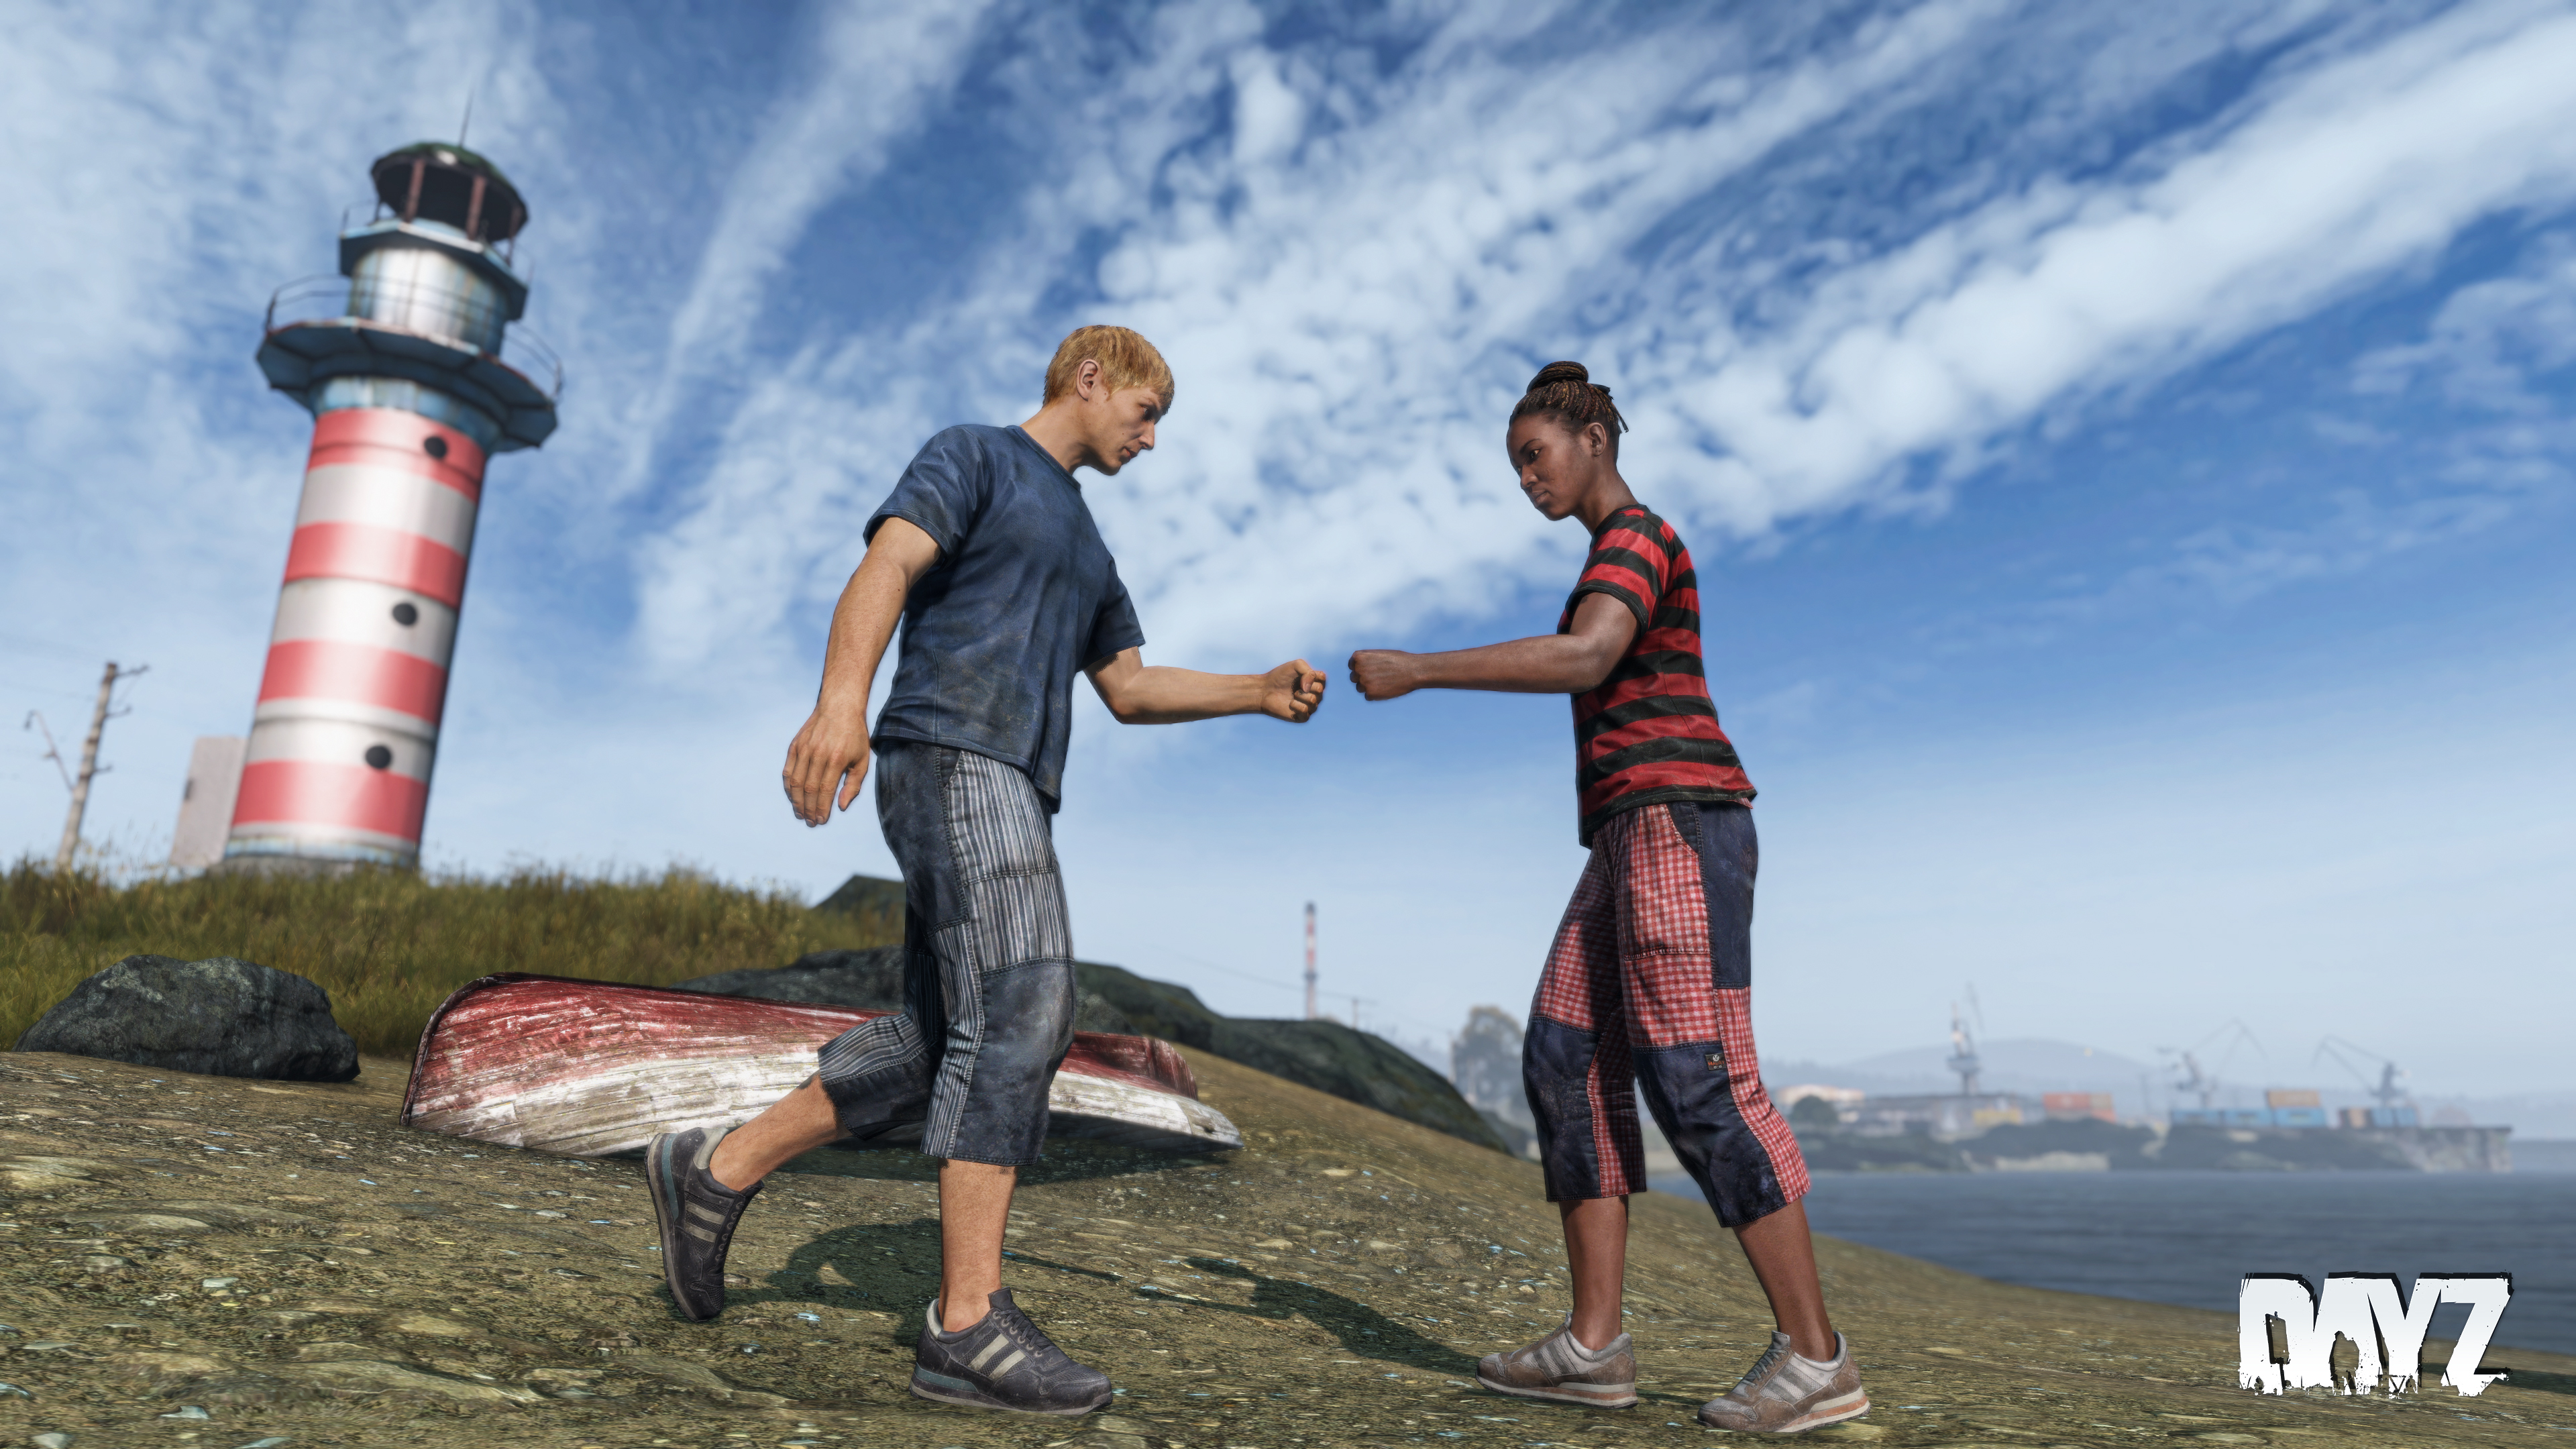 DayZ update 1.23 promises a whole new sky for players to admire